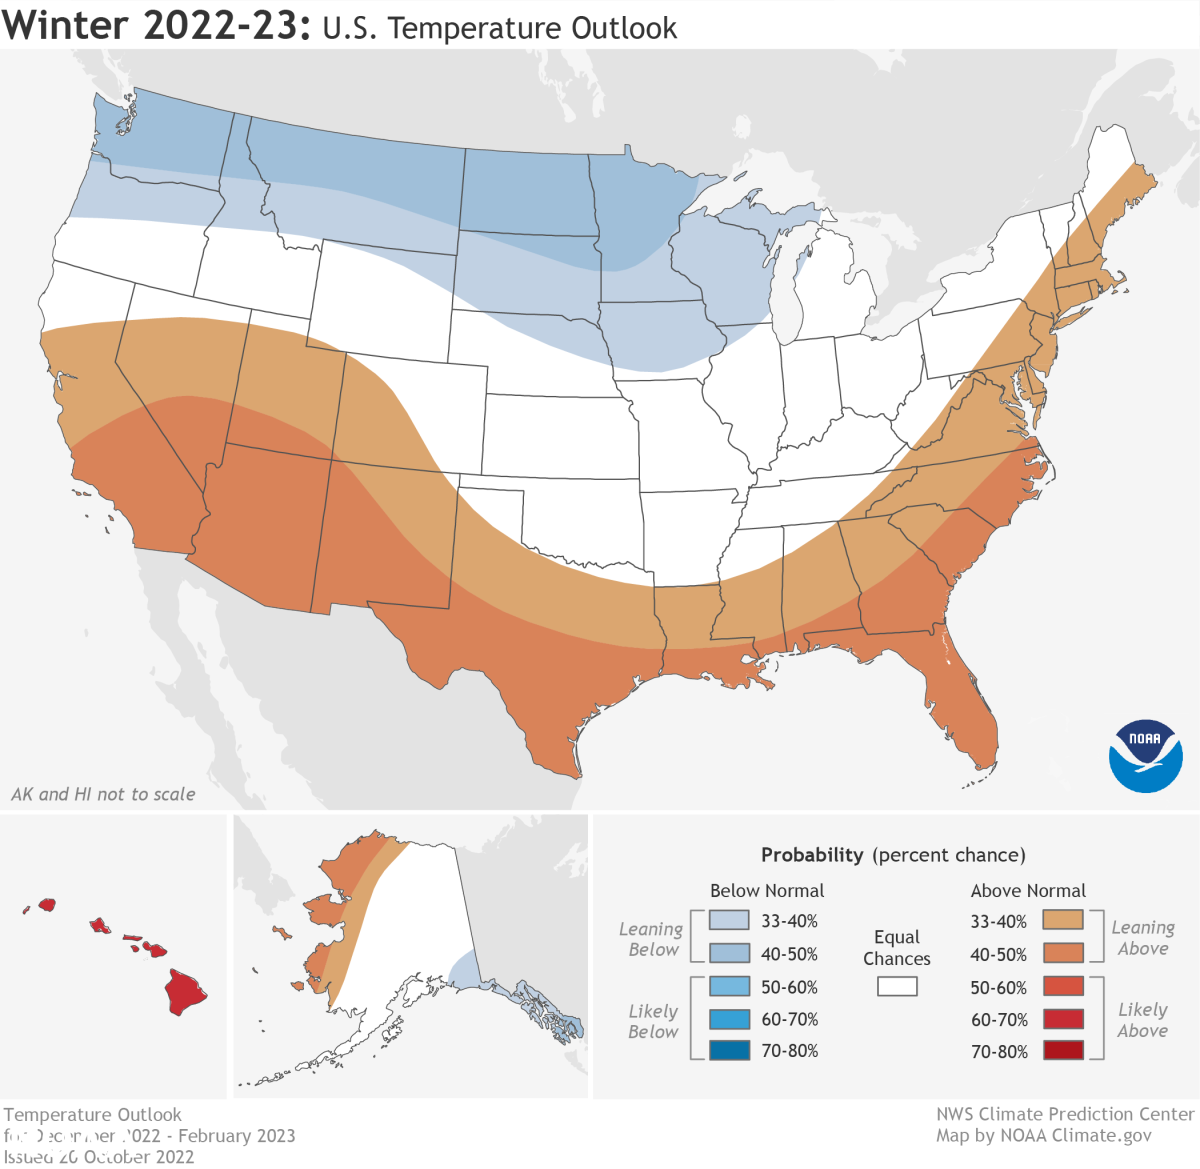 A map shows chances for warmer-than-average conditions in the Southwest and other parts of the U.S. 